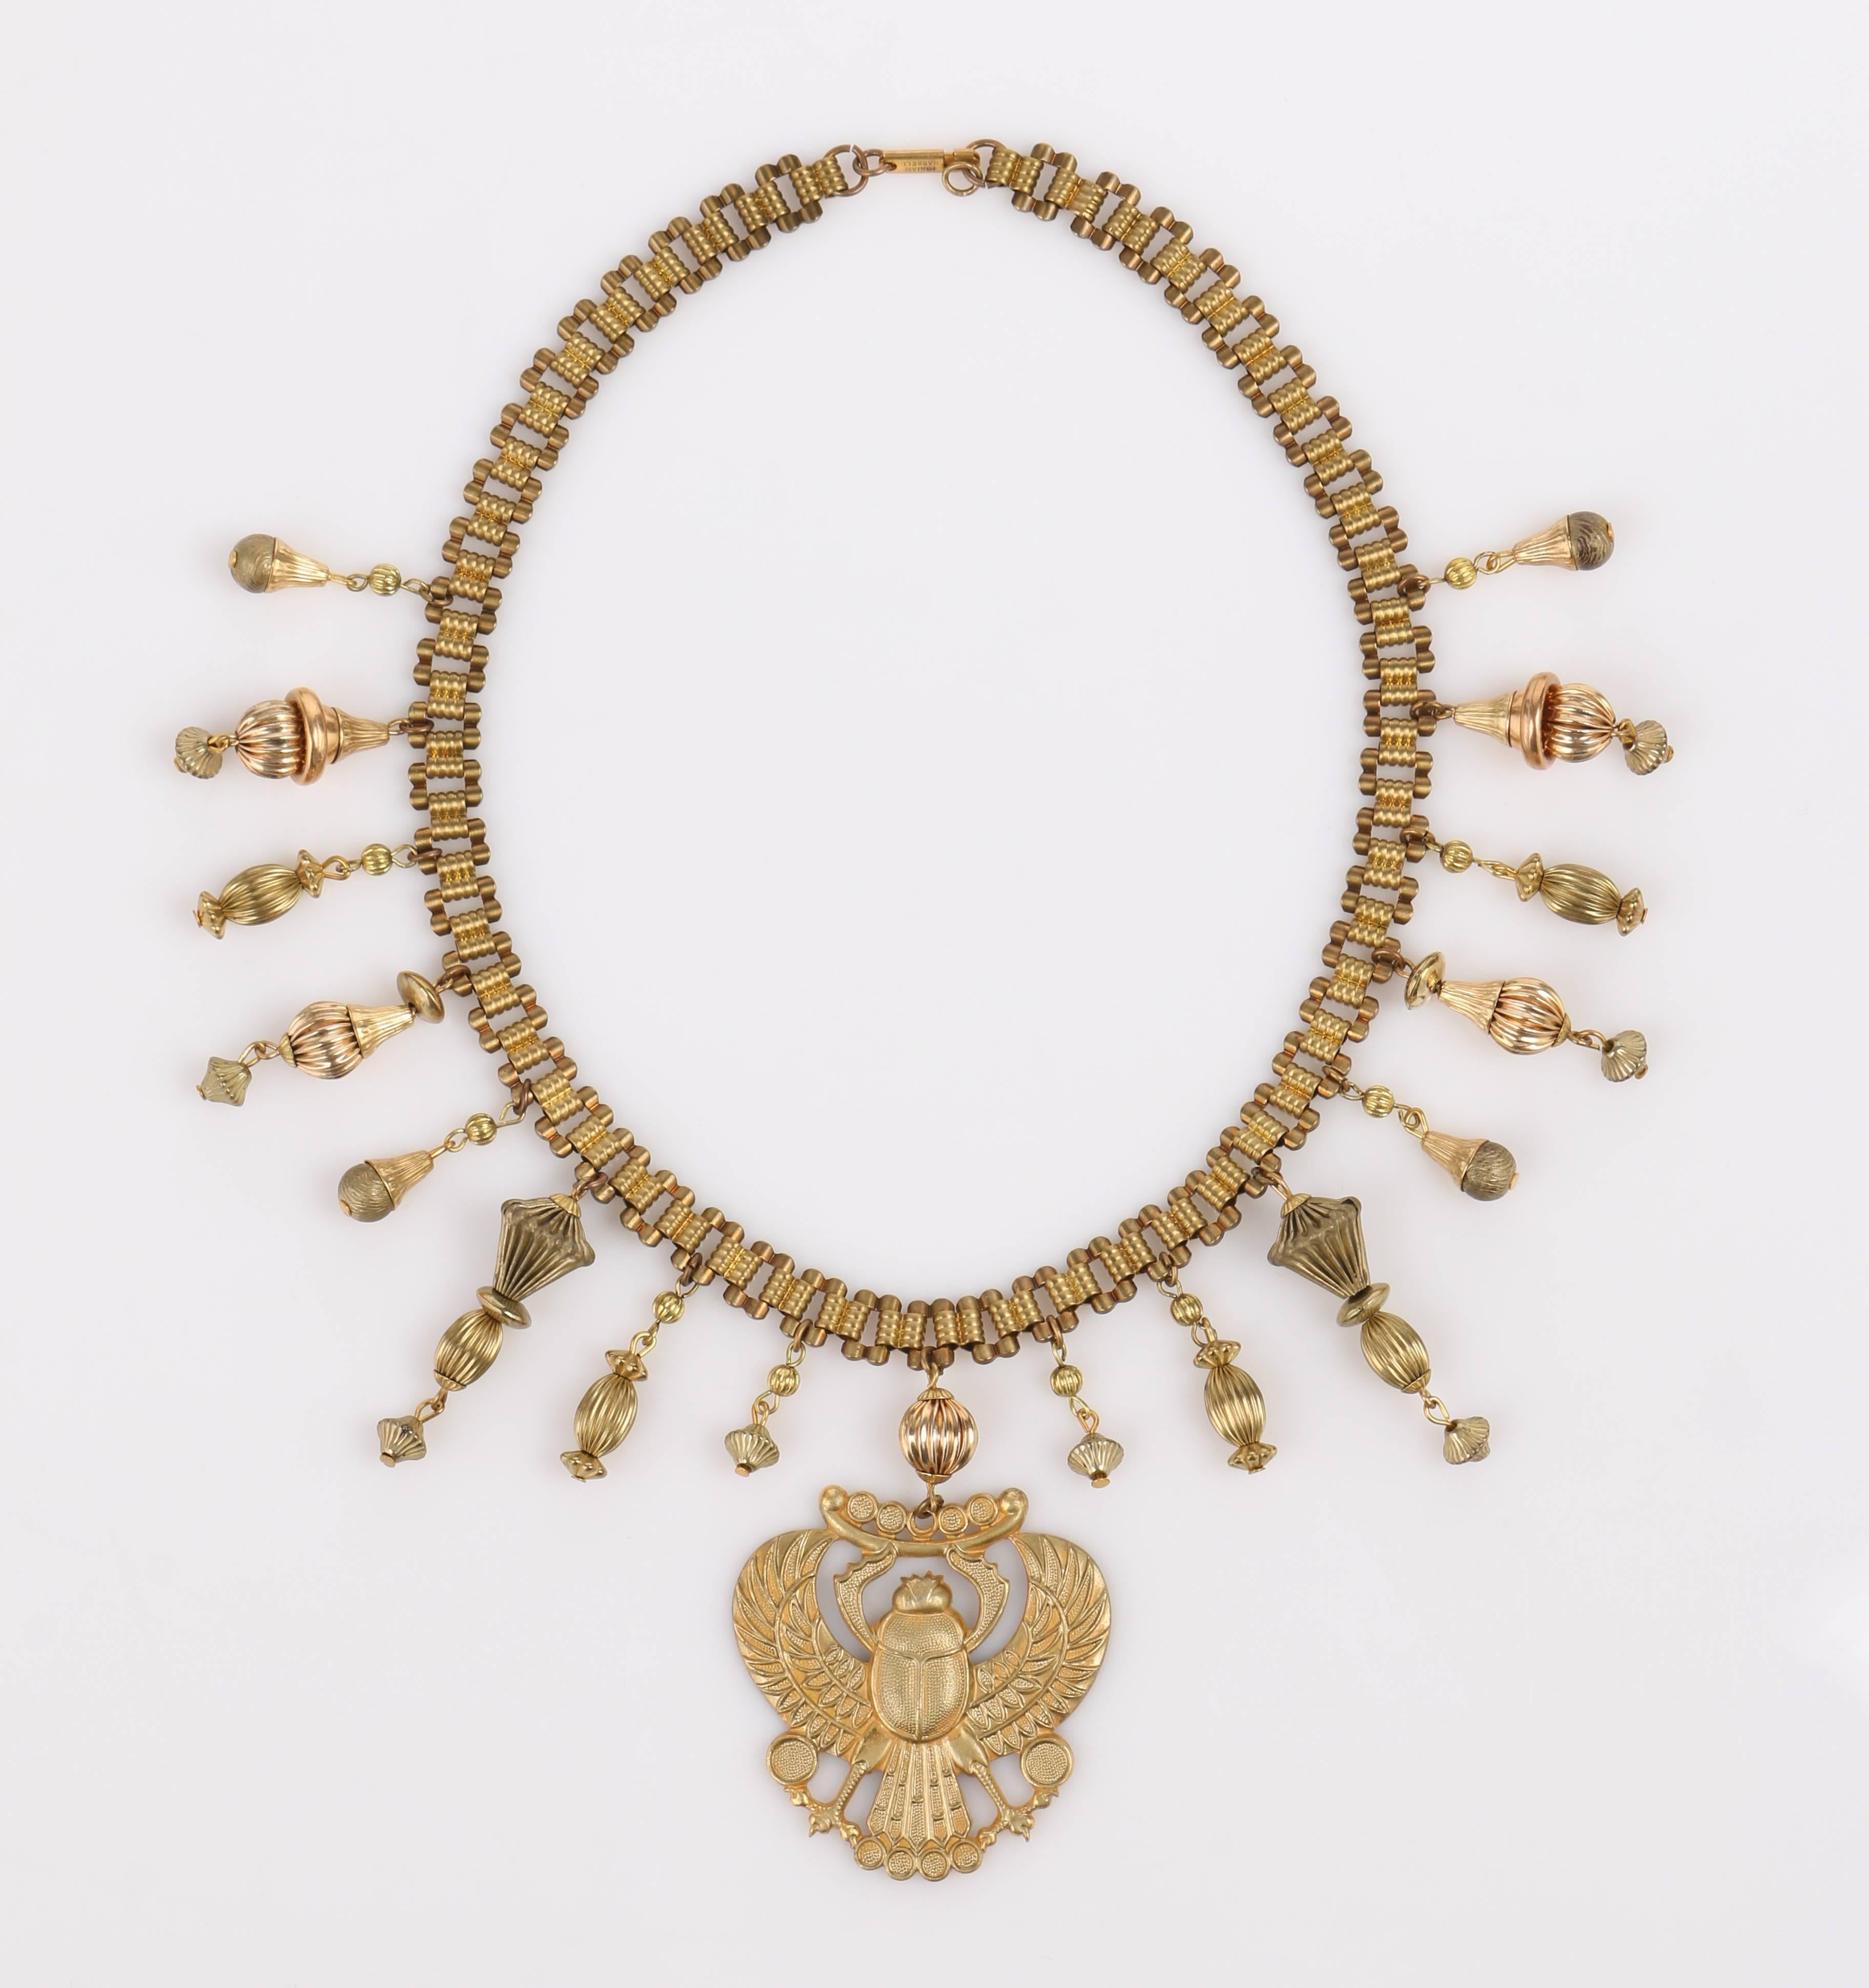 Late 1970s Miriam Haskell (signed) gold-tone winged scarab large pendant necklace. Chain is curb style with rectangular links joined with grooved connectors that look like stacked beads. Push clasp is marked 